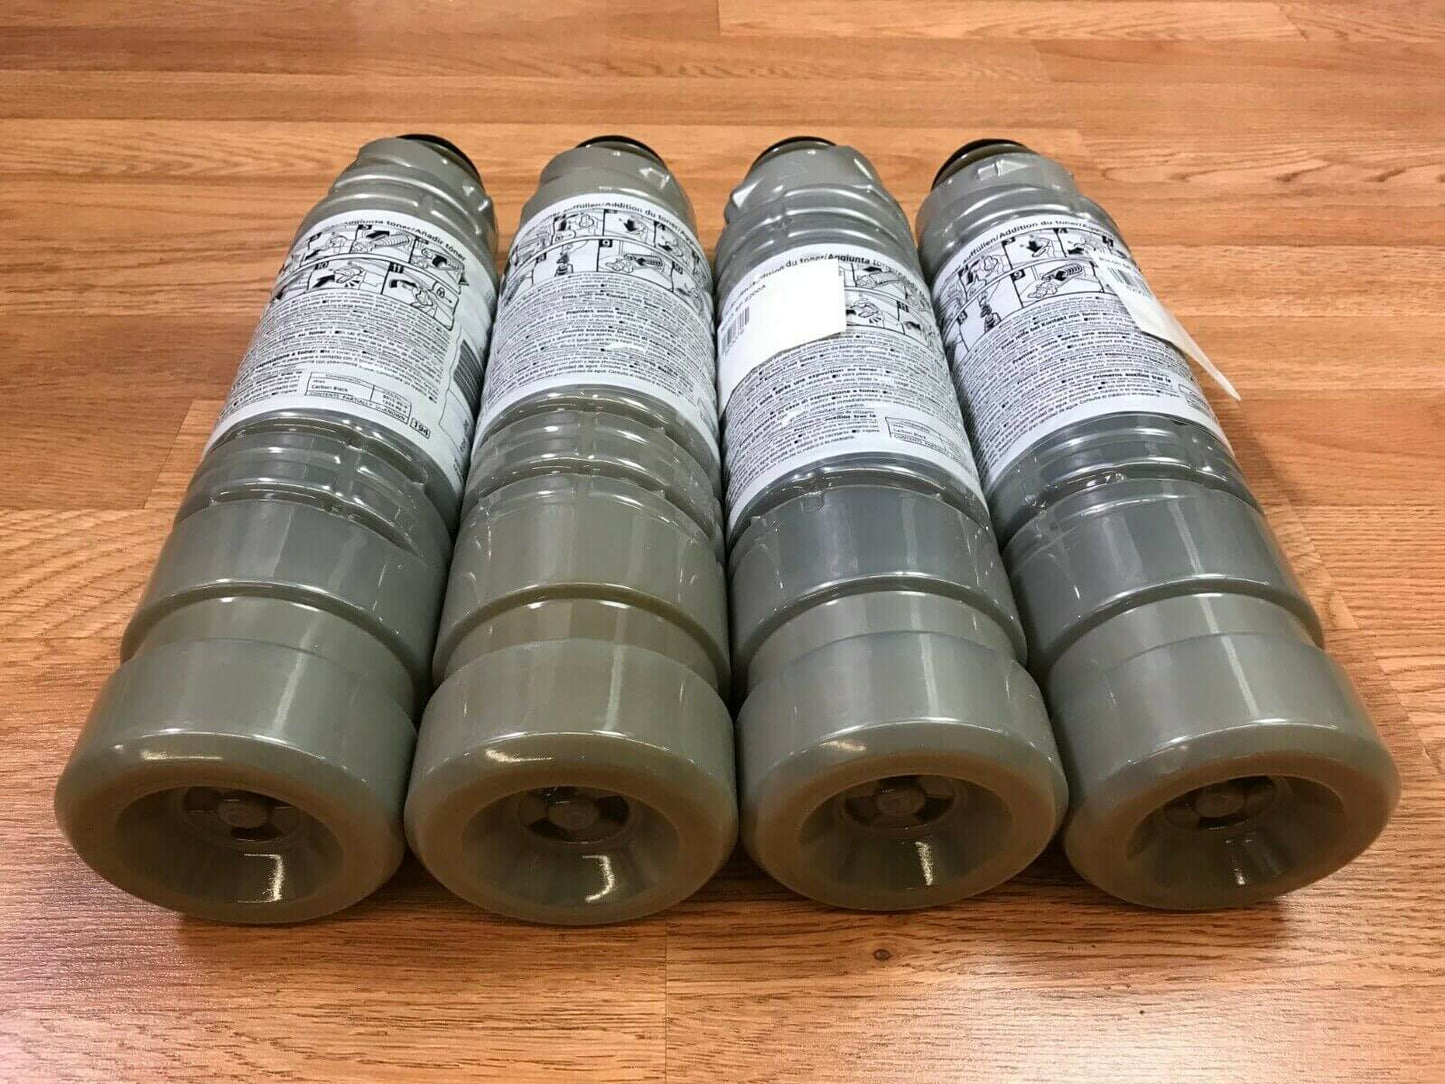 Lot Of 4 Genuine Ricoh Black Toners SP 8200A EDP: 820076 *Same Day Shipping!* - copier-clearance-center